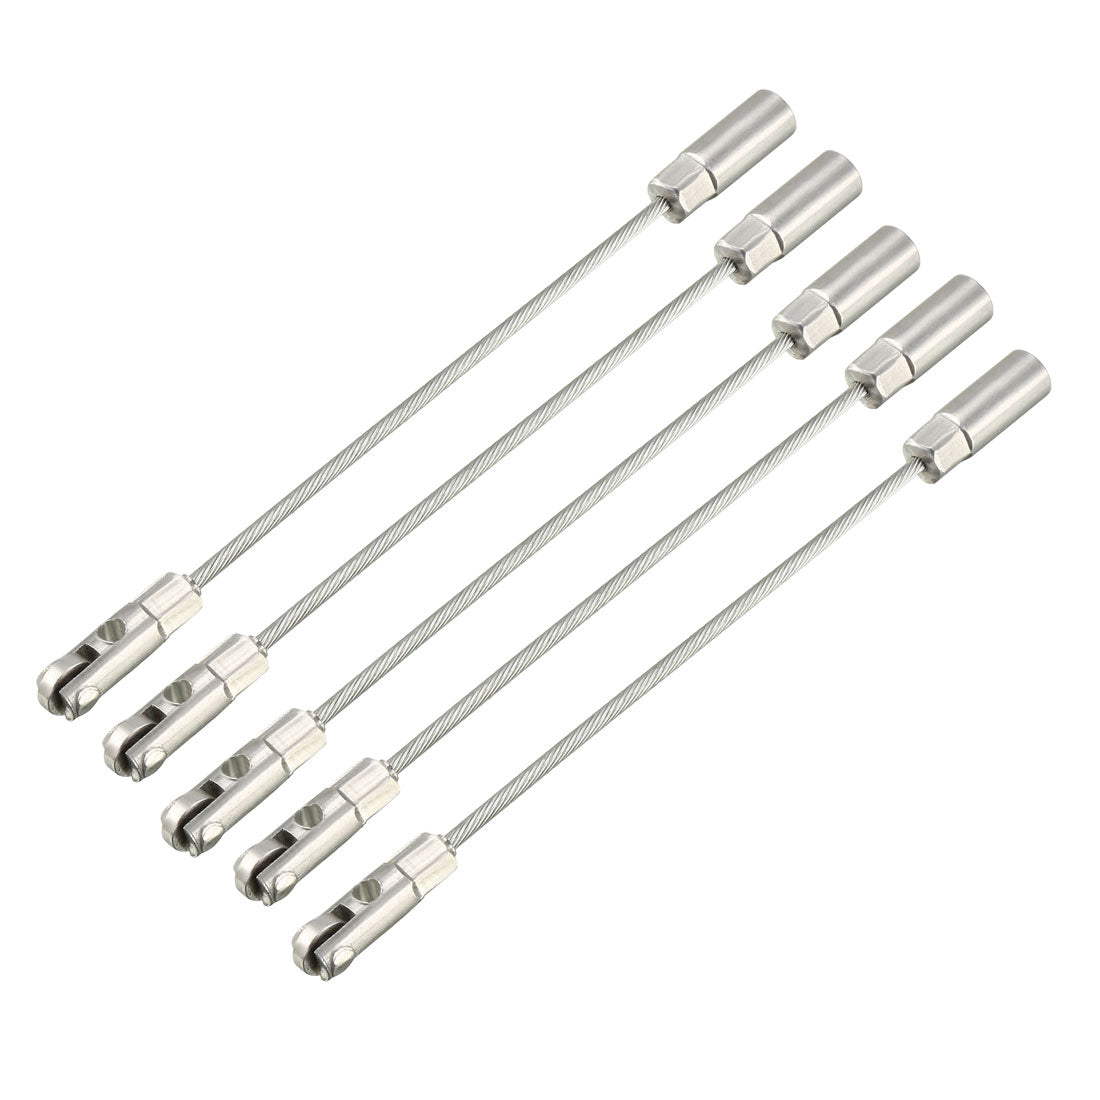 uxcell Uxcell 5PCS 117mm Fish Tape Leader Wire Cable Puller with Roller for 4mm Wire Puller